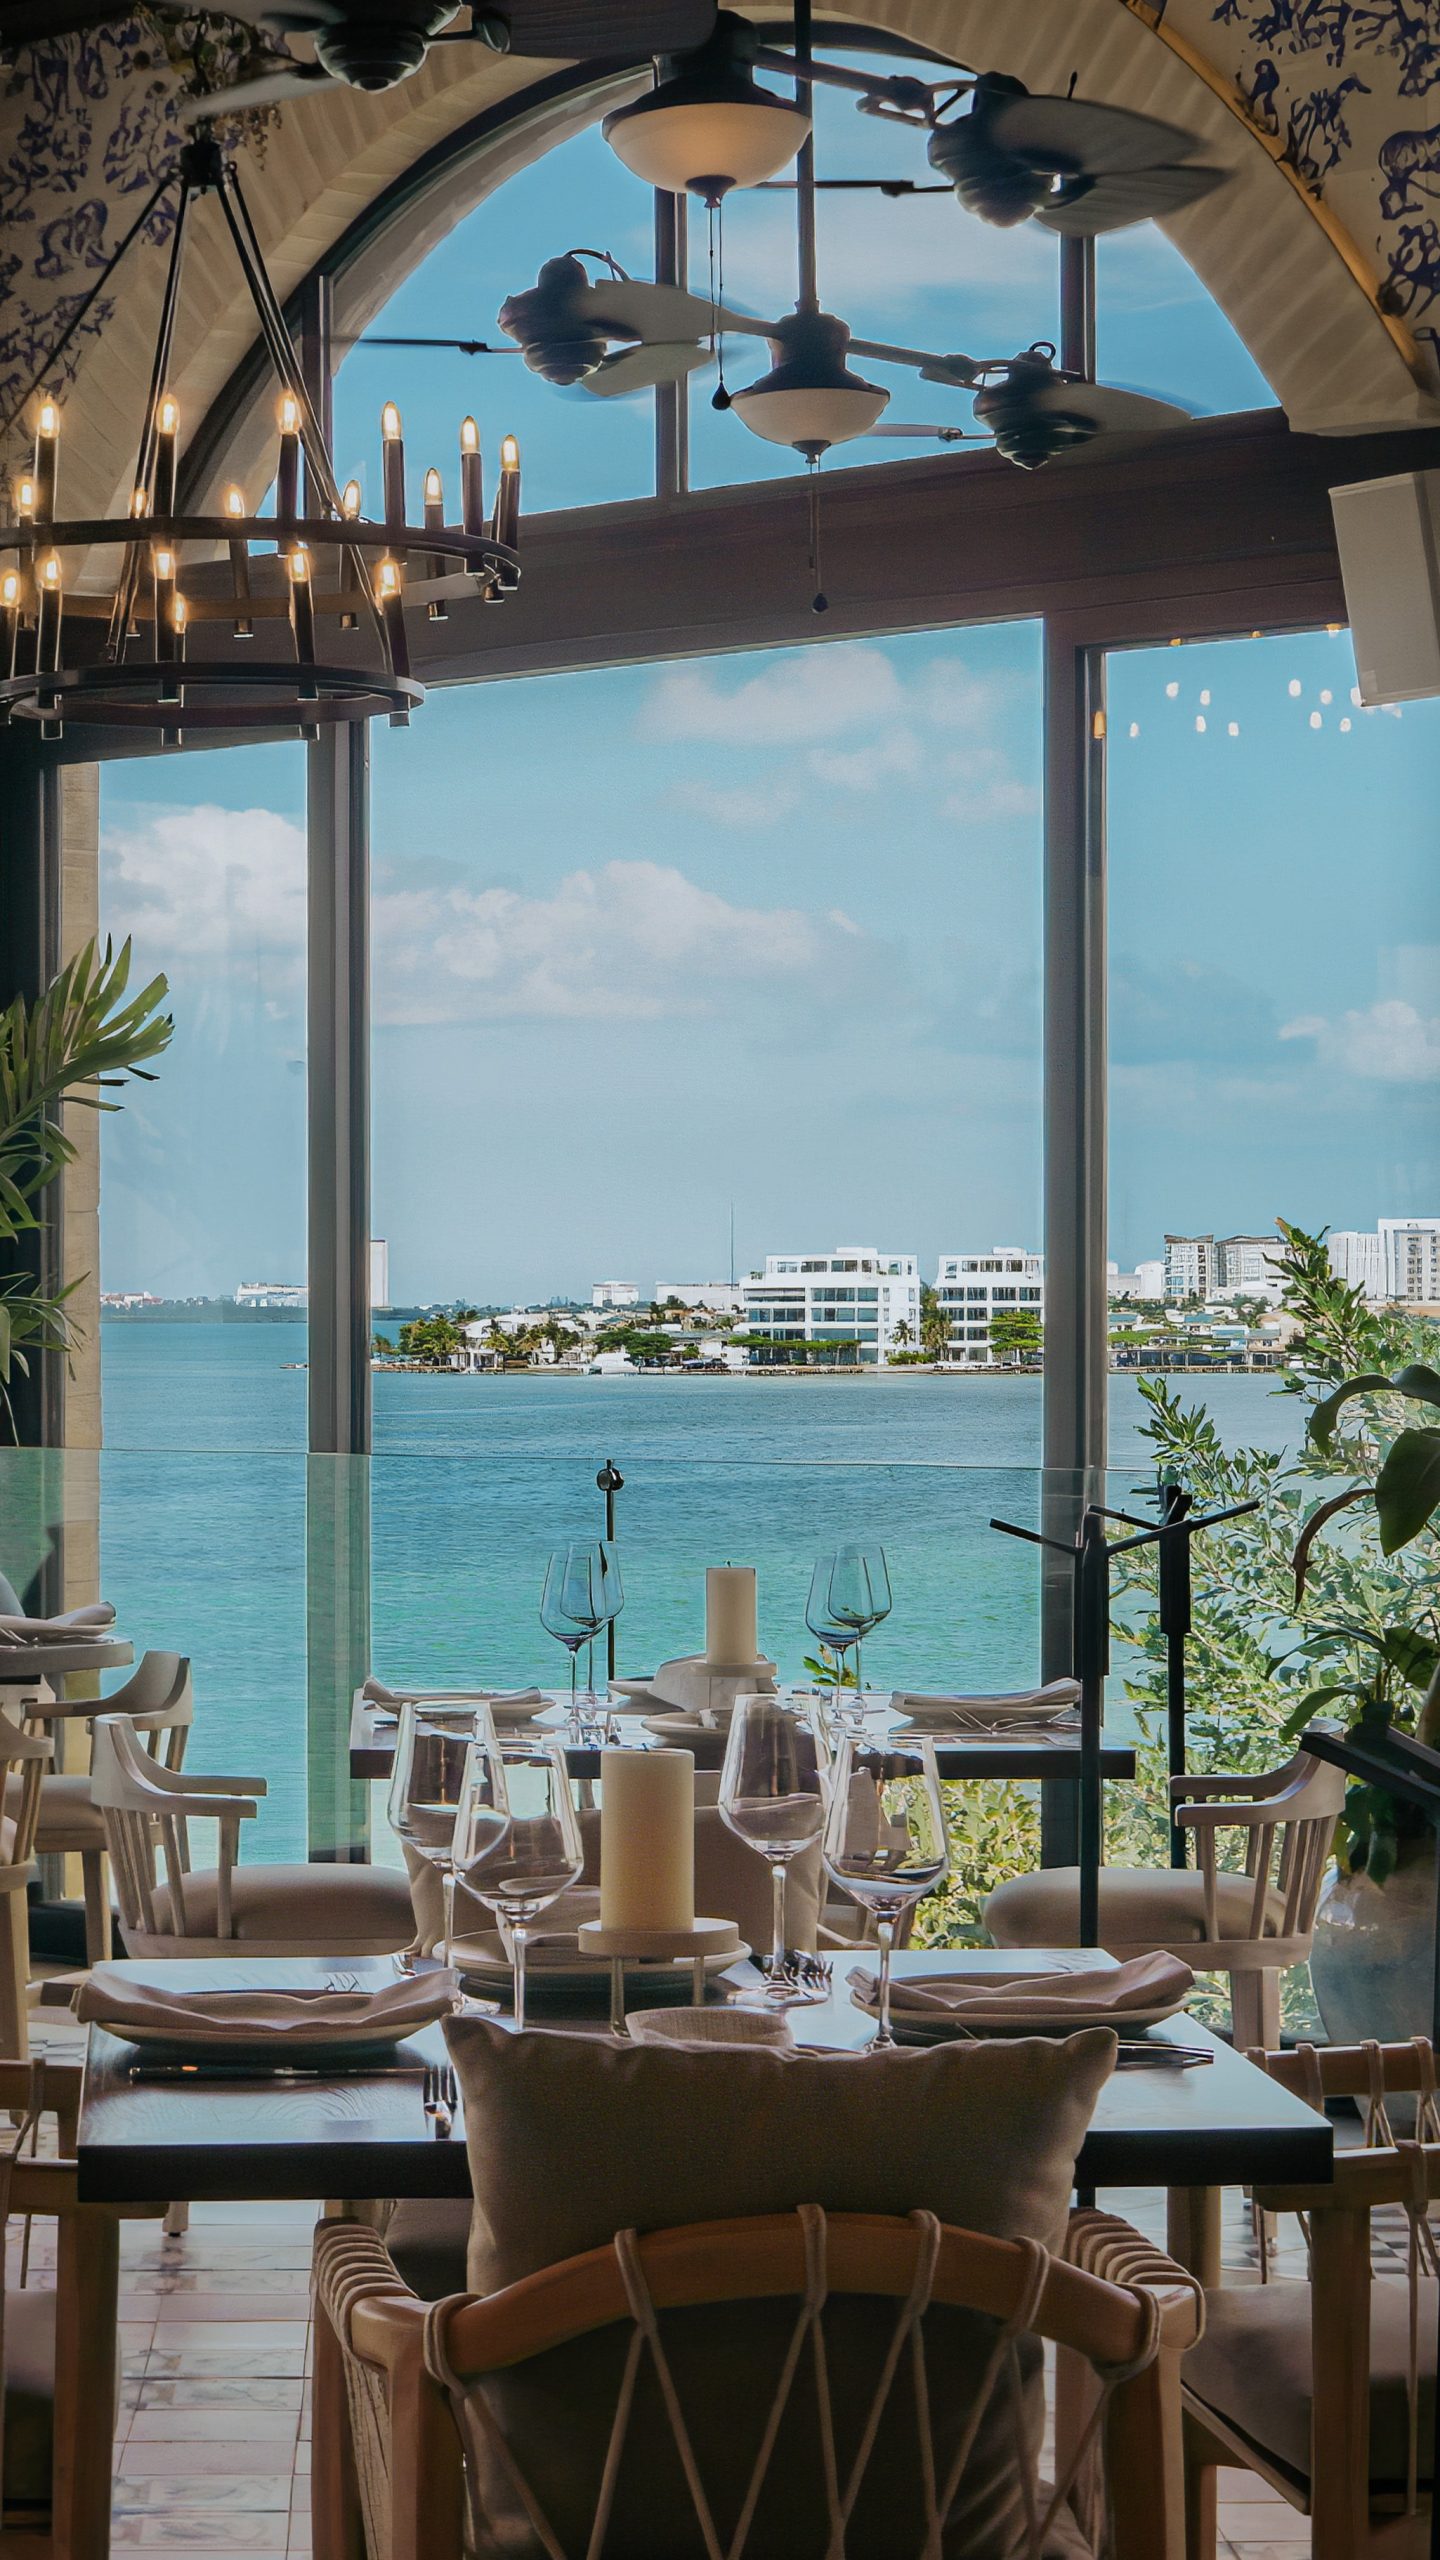 Nicoletta Cancun, the Place of the Moment